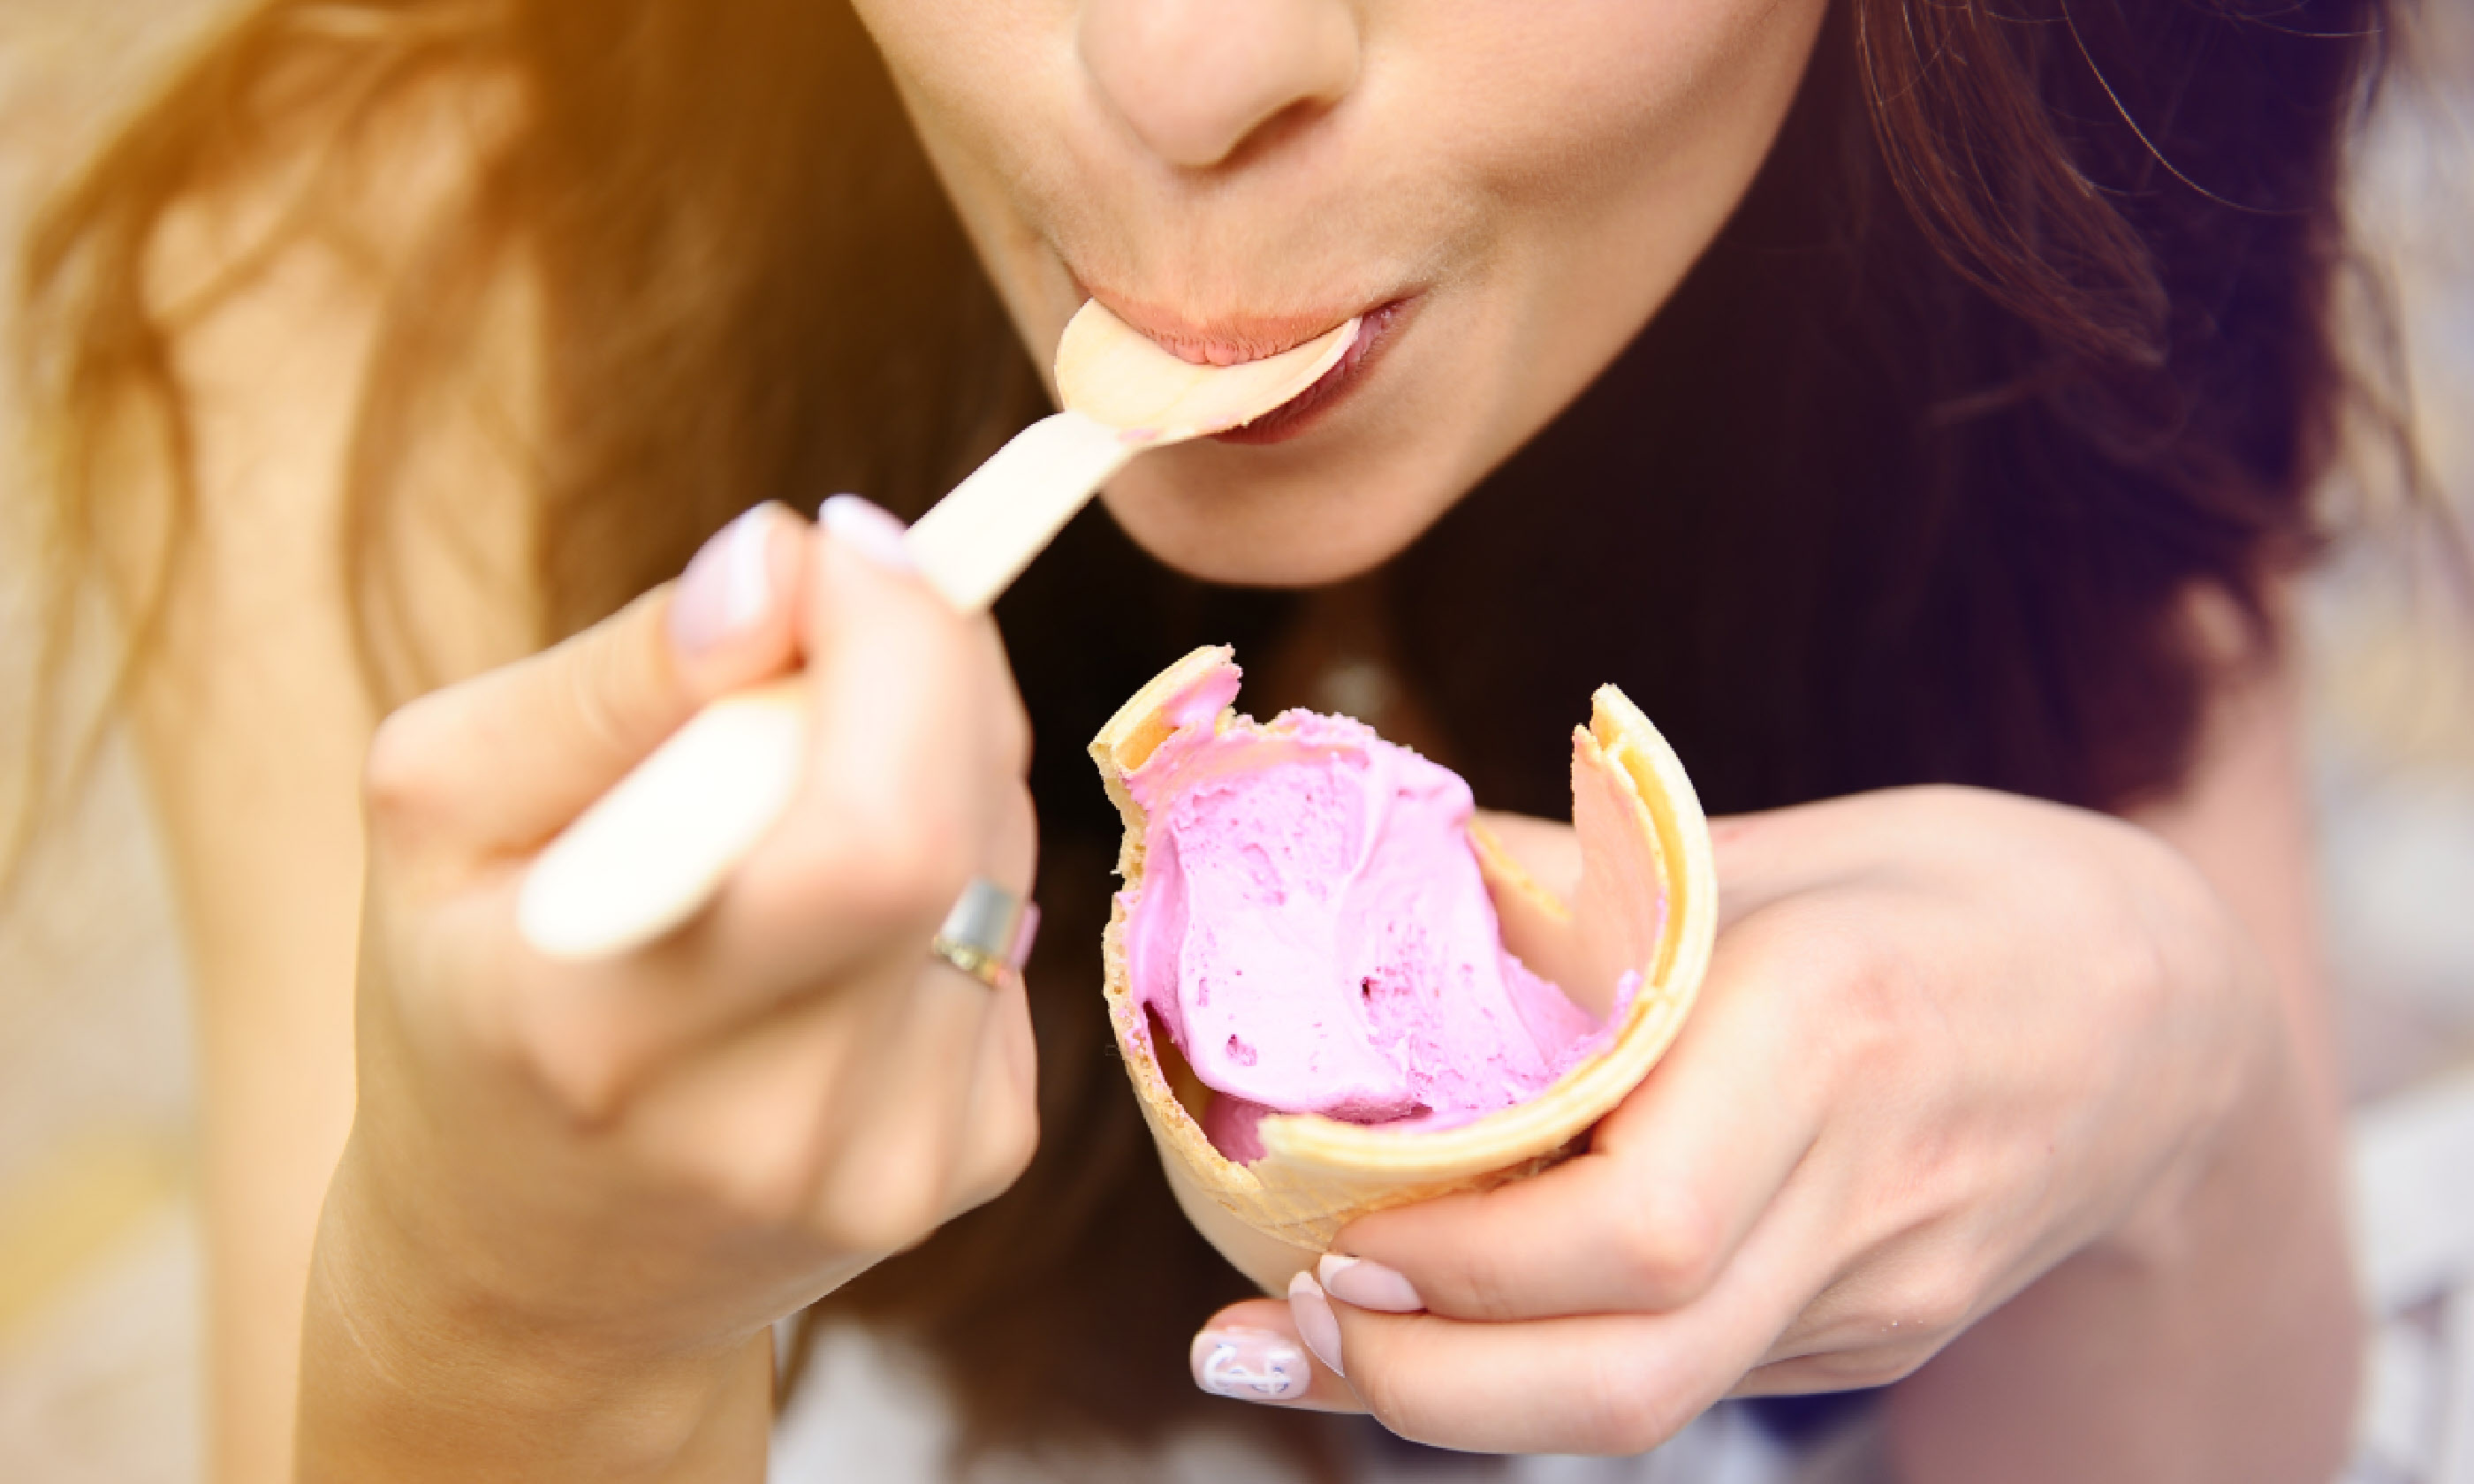 Eating an ice cream (Shutterstock: see credit below)